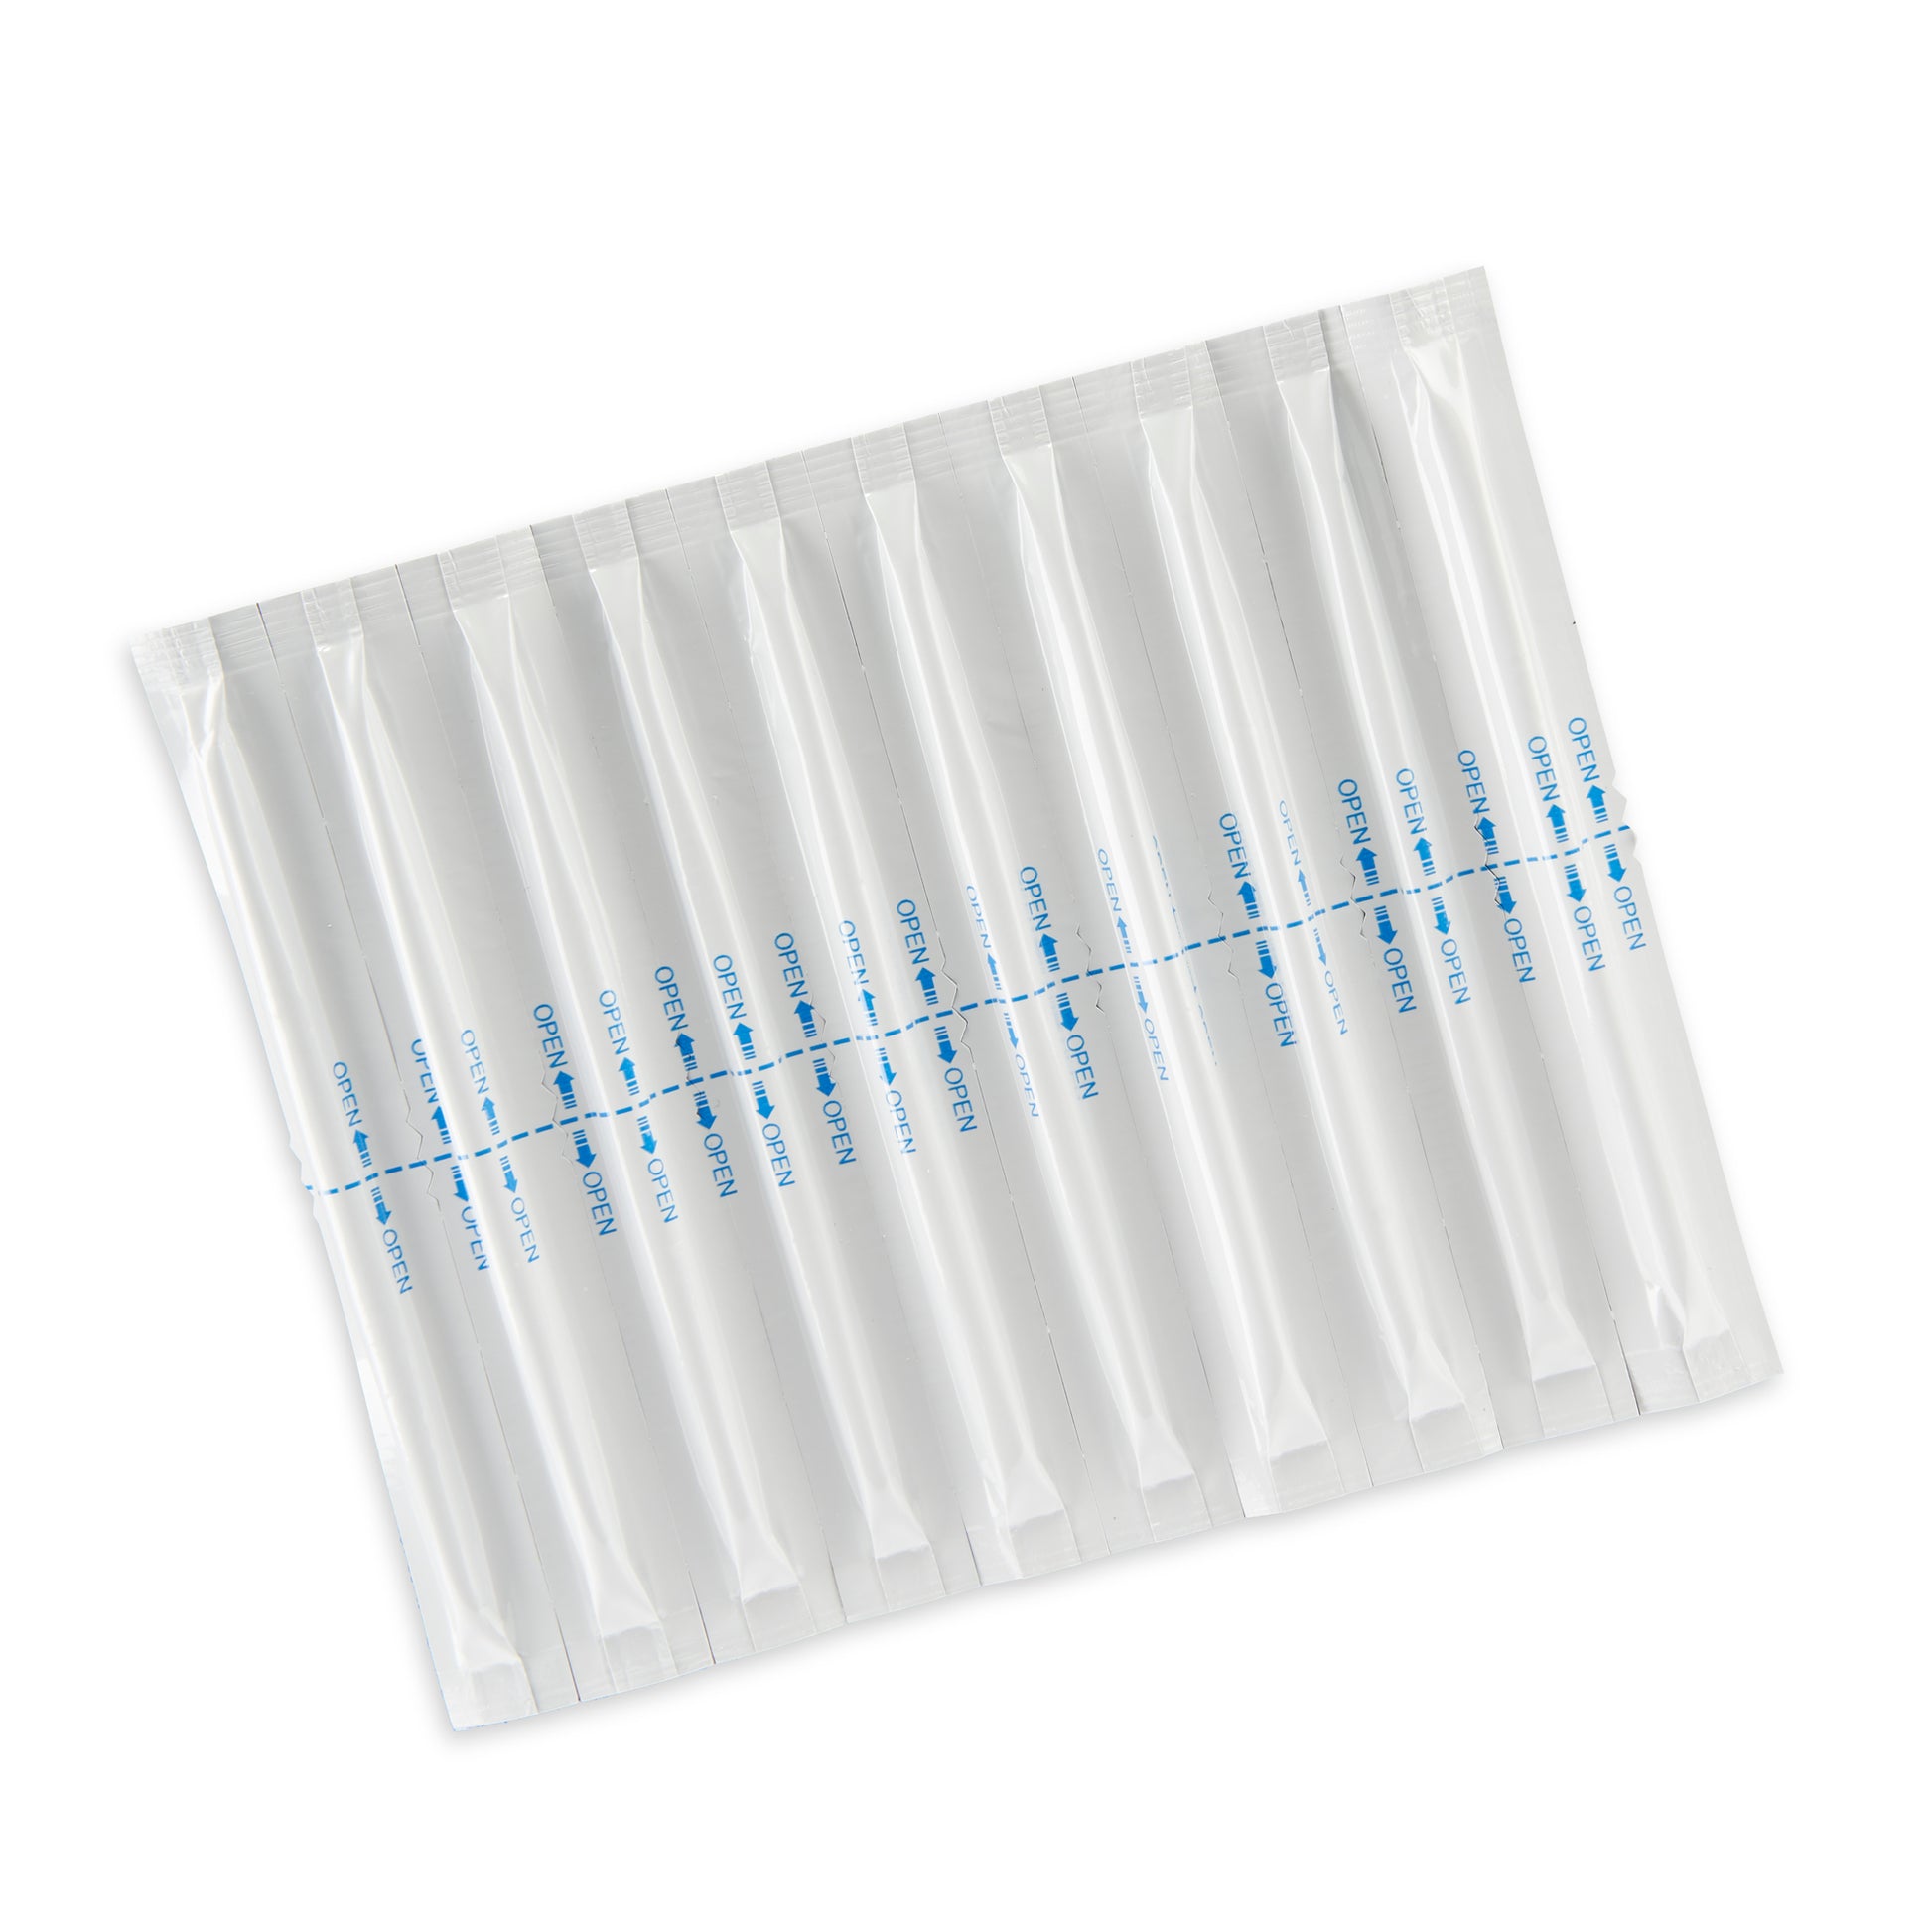 A pack of 10 wrapped Ooze Resolution Micro Swabs